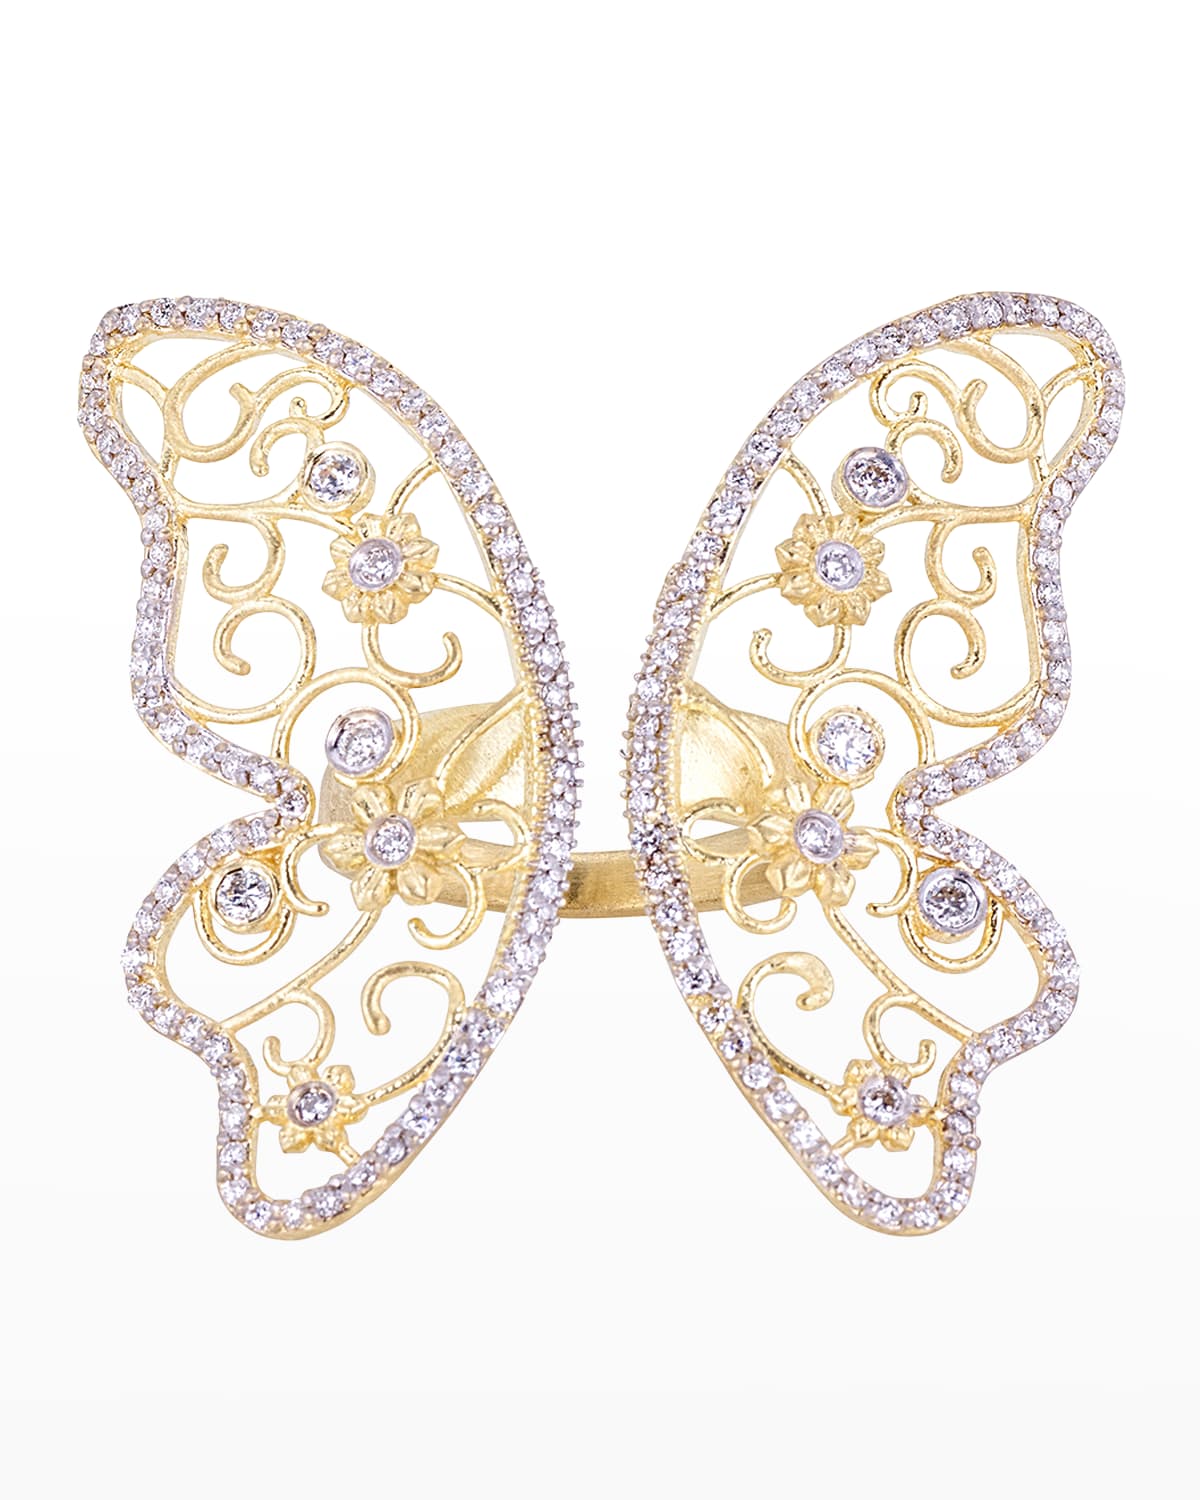 Garden Butterfly Ring with Champagne and White Diamonds in Yellow Gold